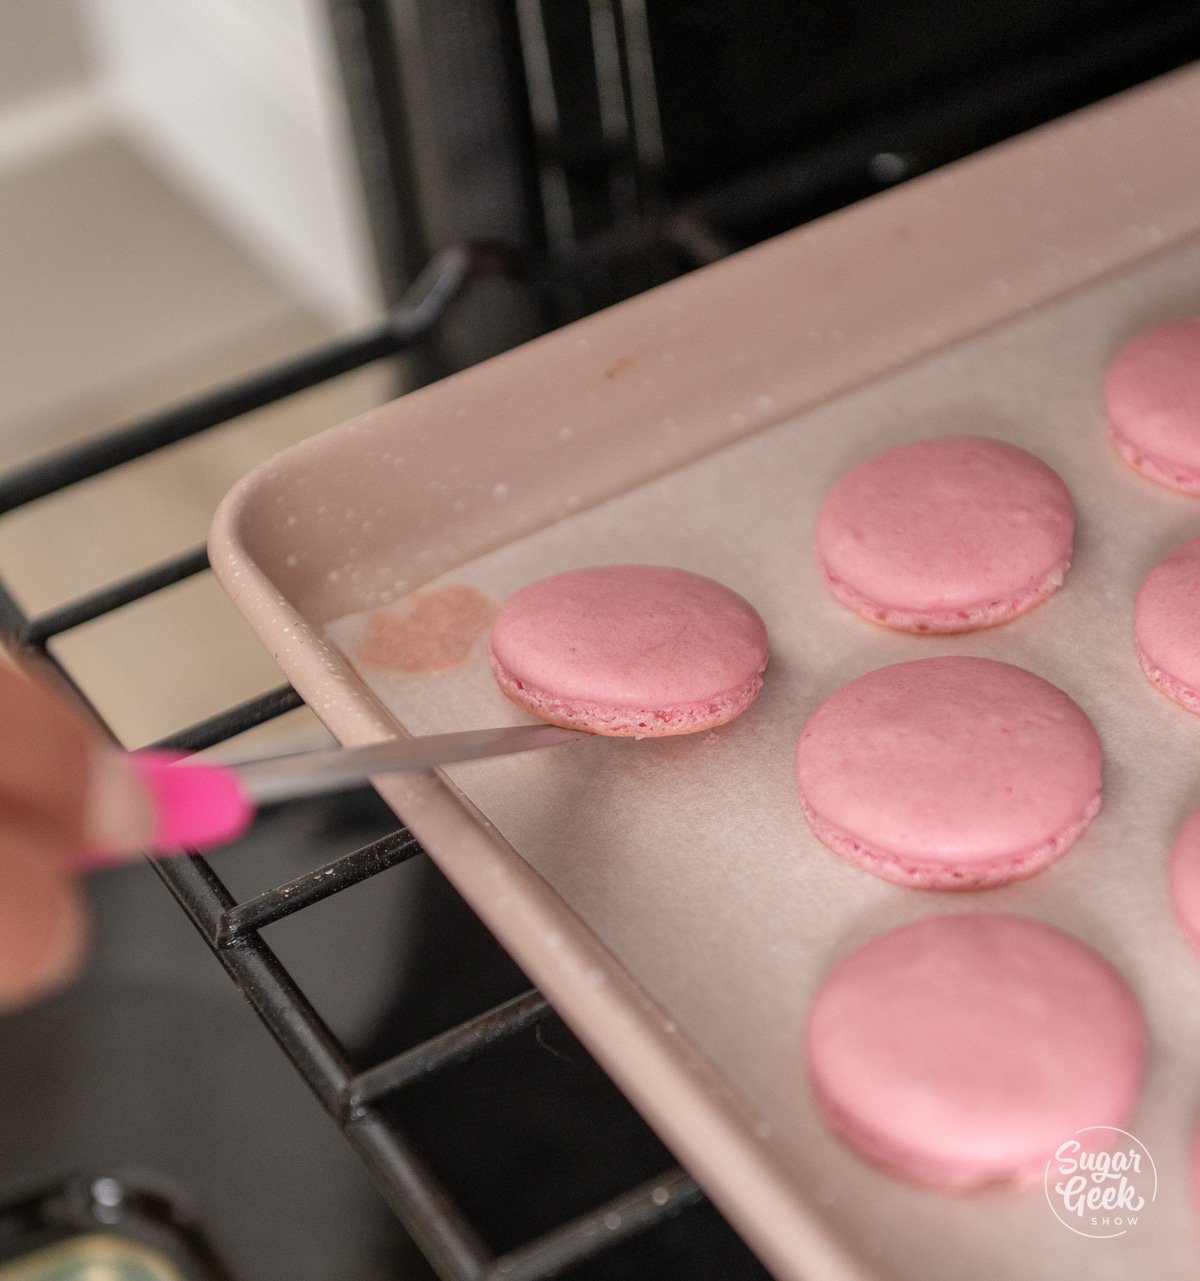 knife lifting a macaron off a baking tray